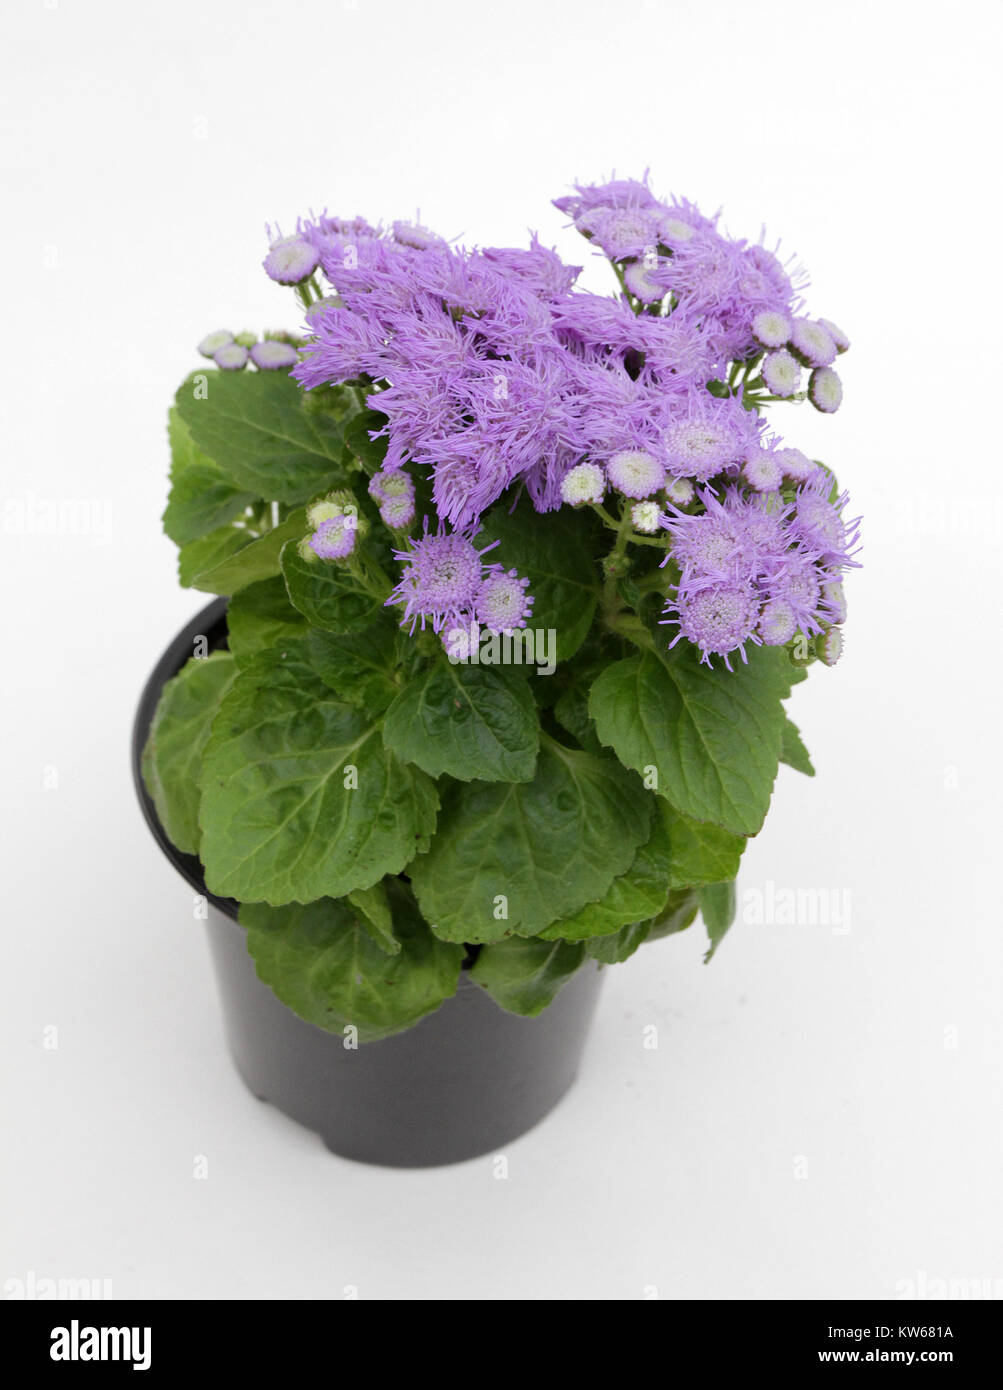 Ageratum. Purple blue ageratum flowers in pot isolated on white background. Plant Ageratum floral pattern, blue flowers background Stock Photo